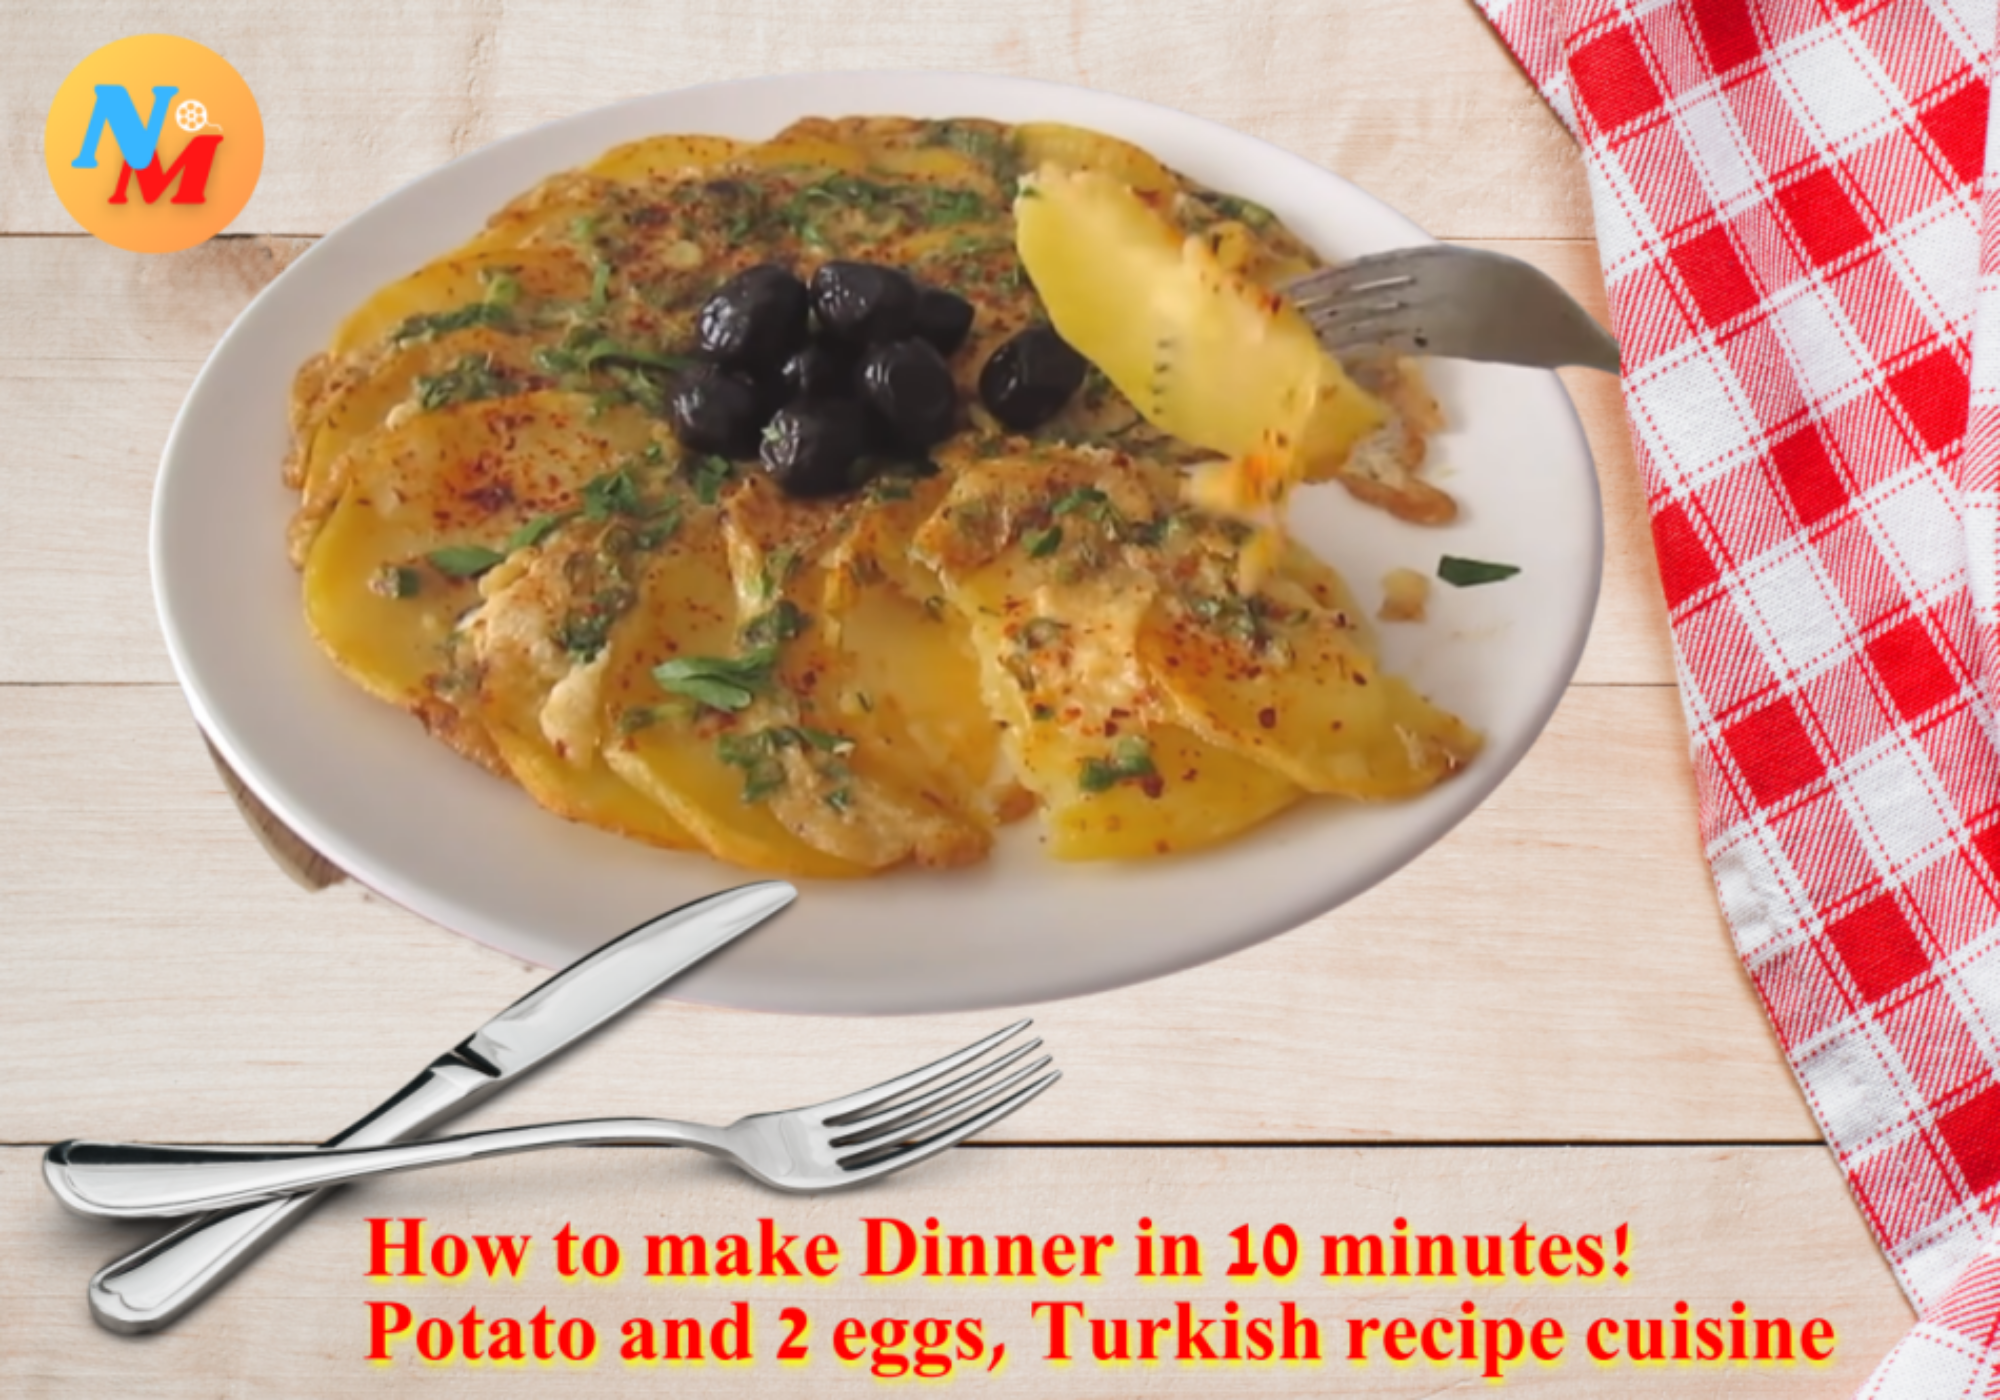 How to make Dinner in 10 minutes! 1 Potato and 2 eggs, Turkish recipe cuisine, Video food file